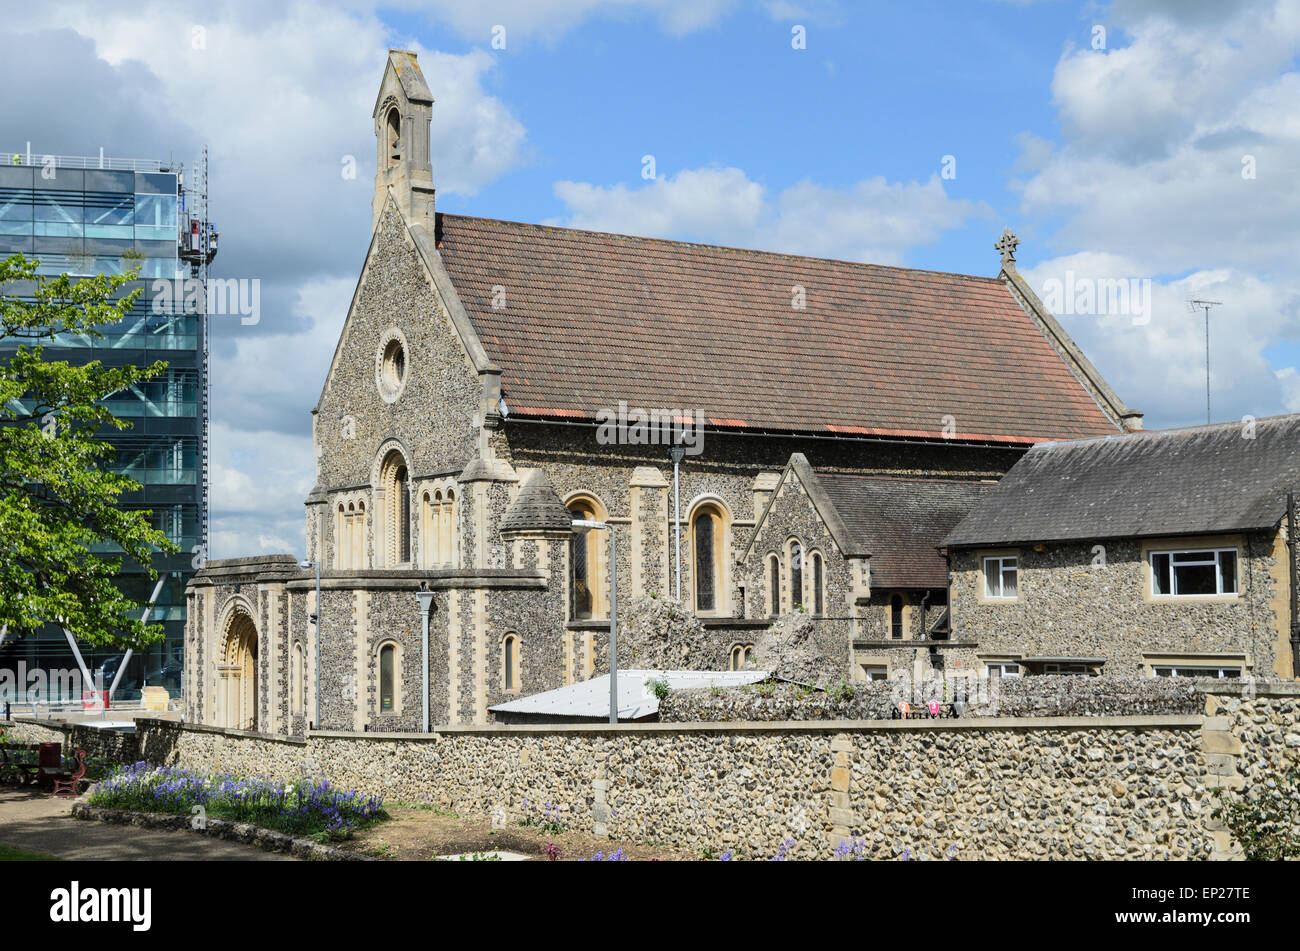 St James Church, Reading is situated on the site of the former Reading Abbey. Stock Photo